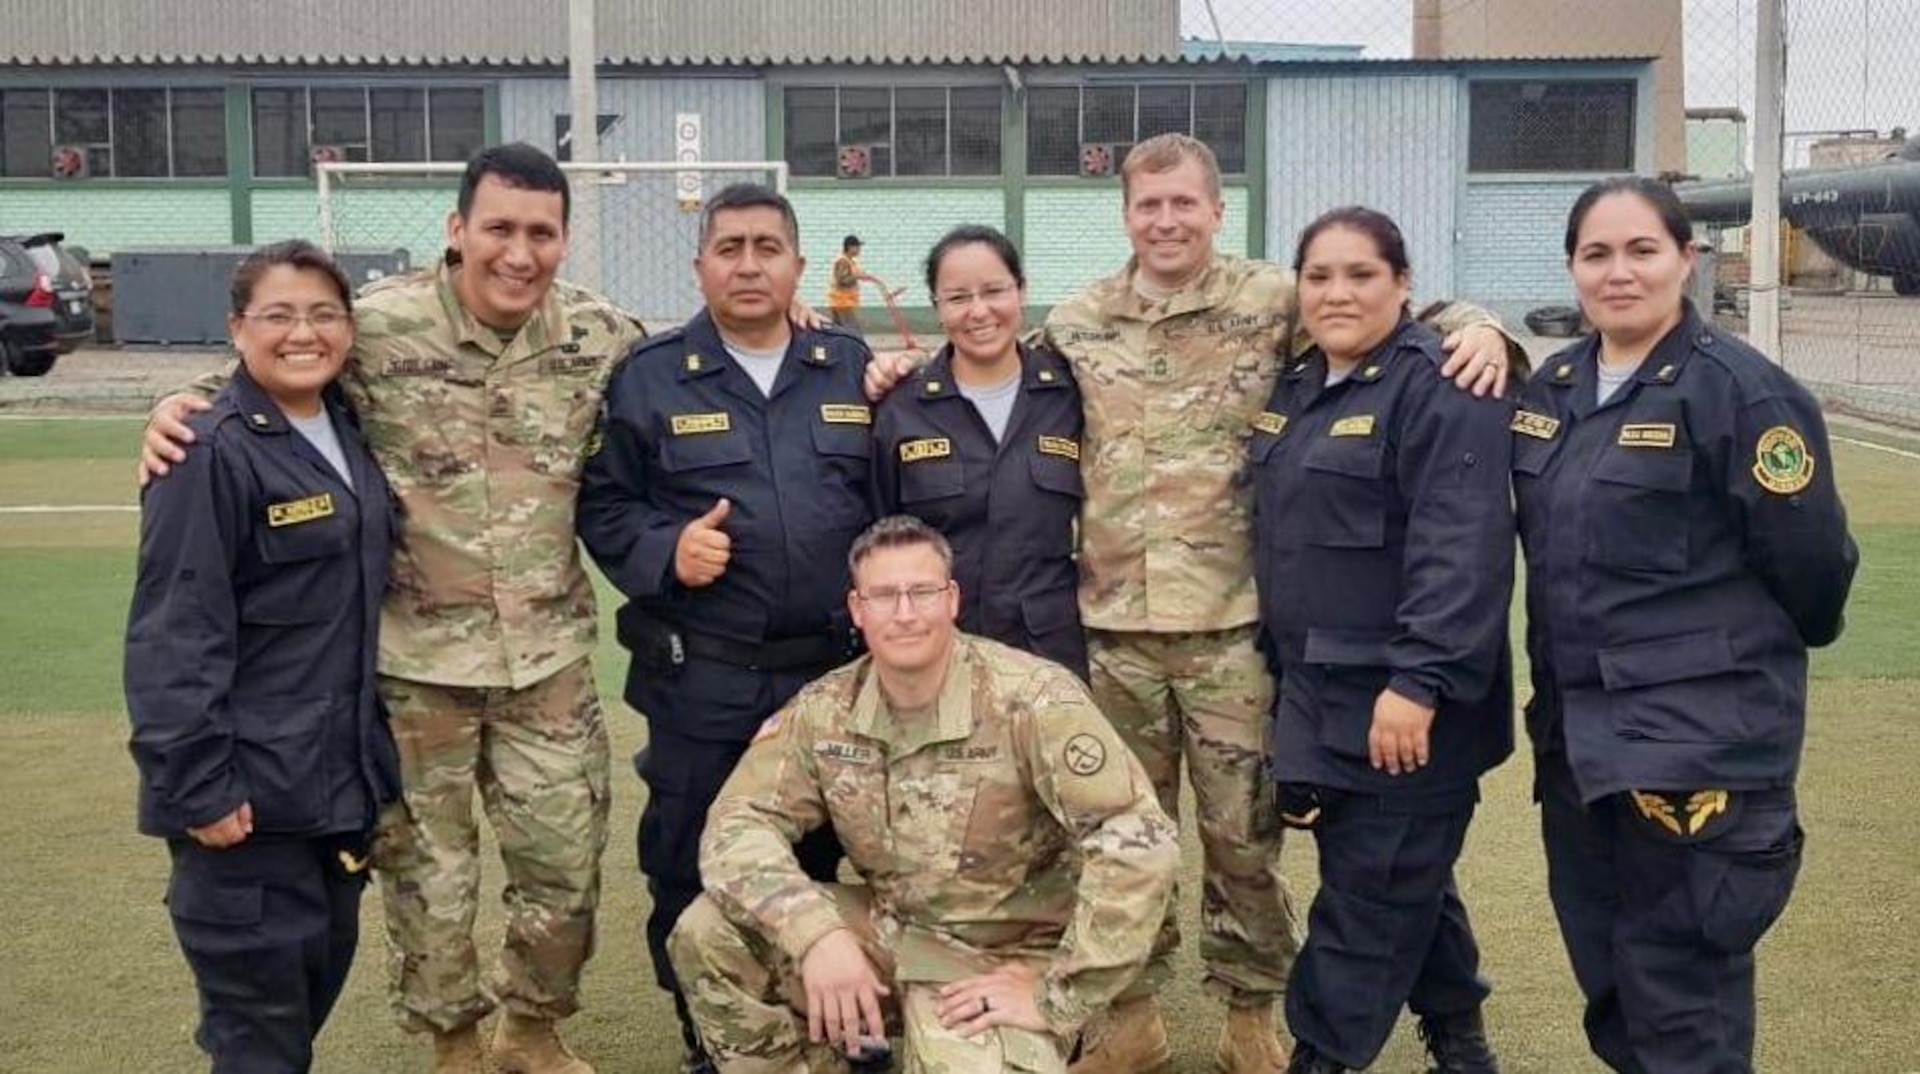 Sgt. 1st Class Hector Guillen (left), Sgt. Brad Miller (bottom middle), and Master Sgt. Evan McDonough (right) pose for a photo with members of the Peruvian National Police July 2, 2019, in Lima, Peru. Members of the WVARNG trained more than 120 members of the Peruvian Armed Forces and the Peruvian National Police on a variety of aeromedical topics during a week-long subject matter exchange. (Courtesy photo)